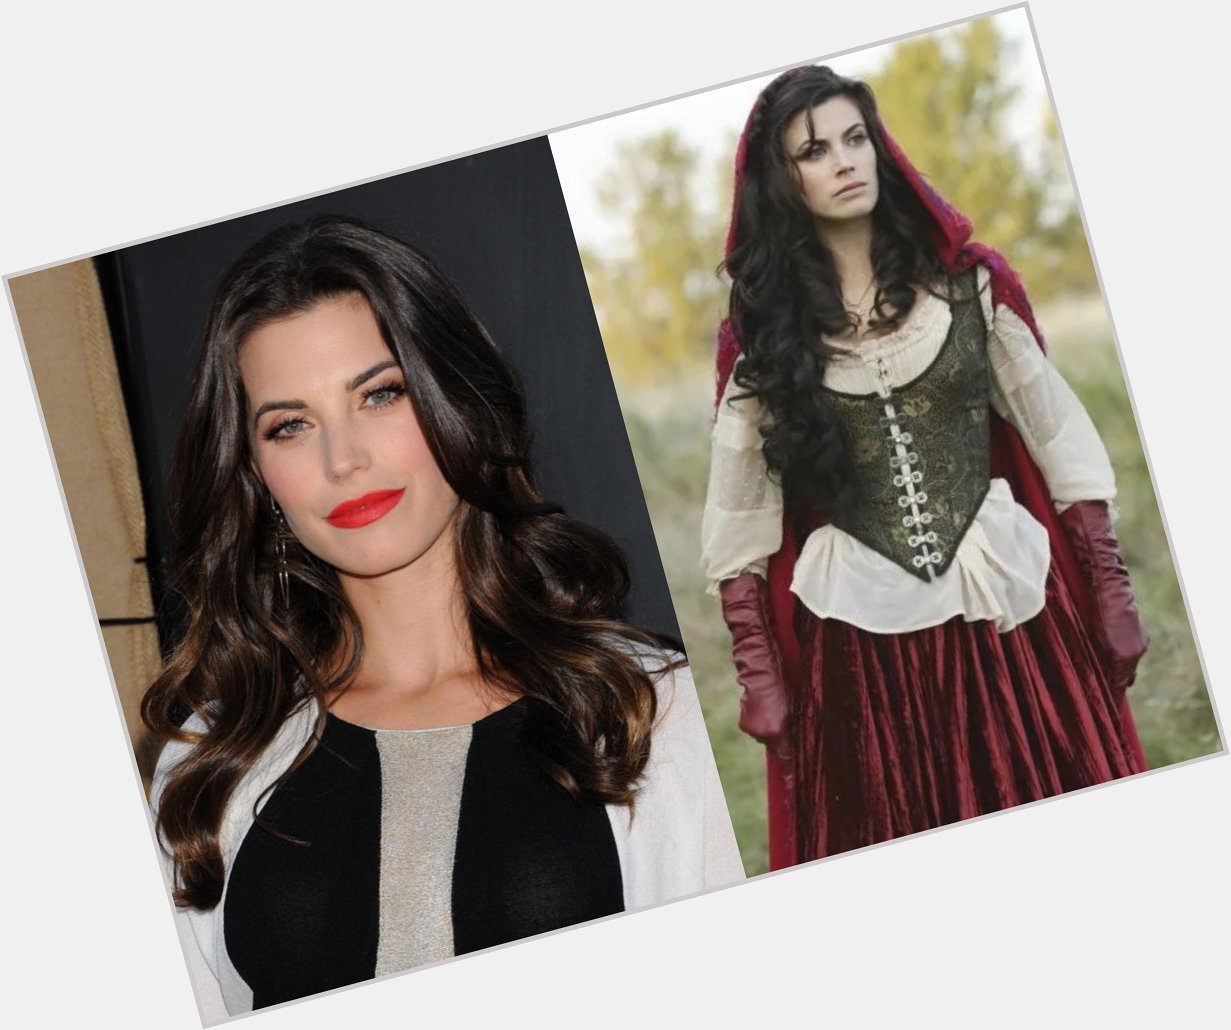 Happy 39th Birthday to Meghan Ory! The actress who played Ruby (Red Riding Hood) on Once Upon a Time. 